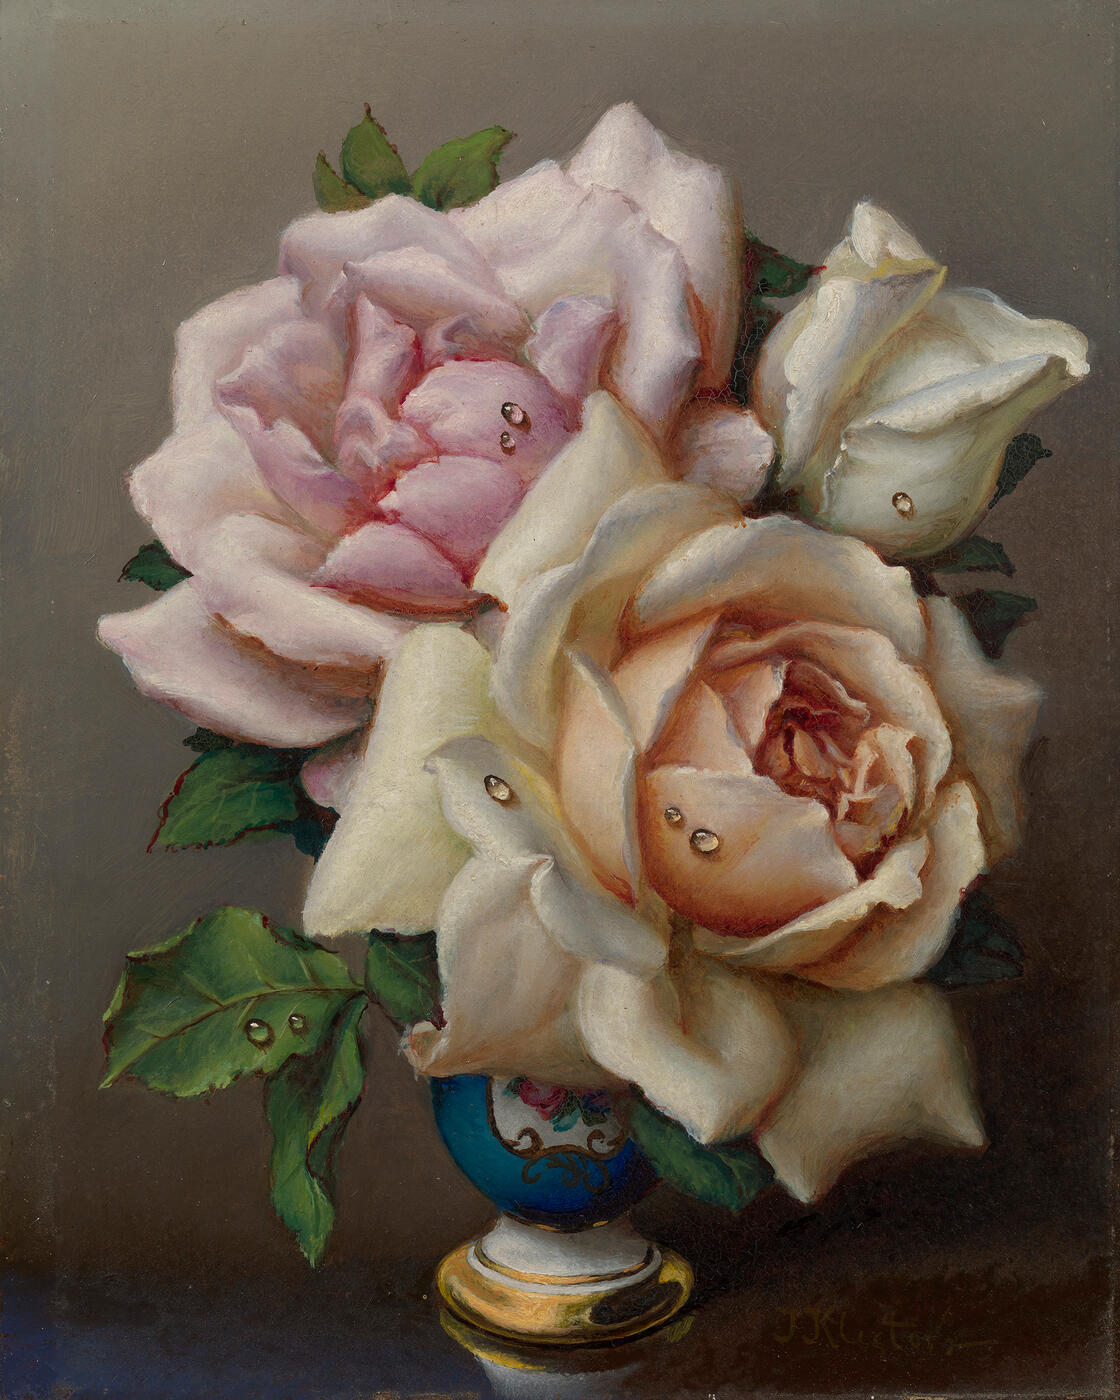 White and Pink Roses